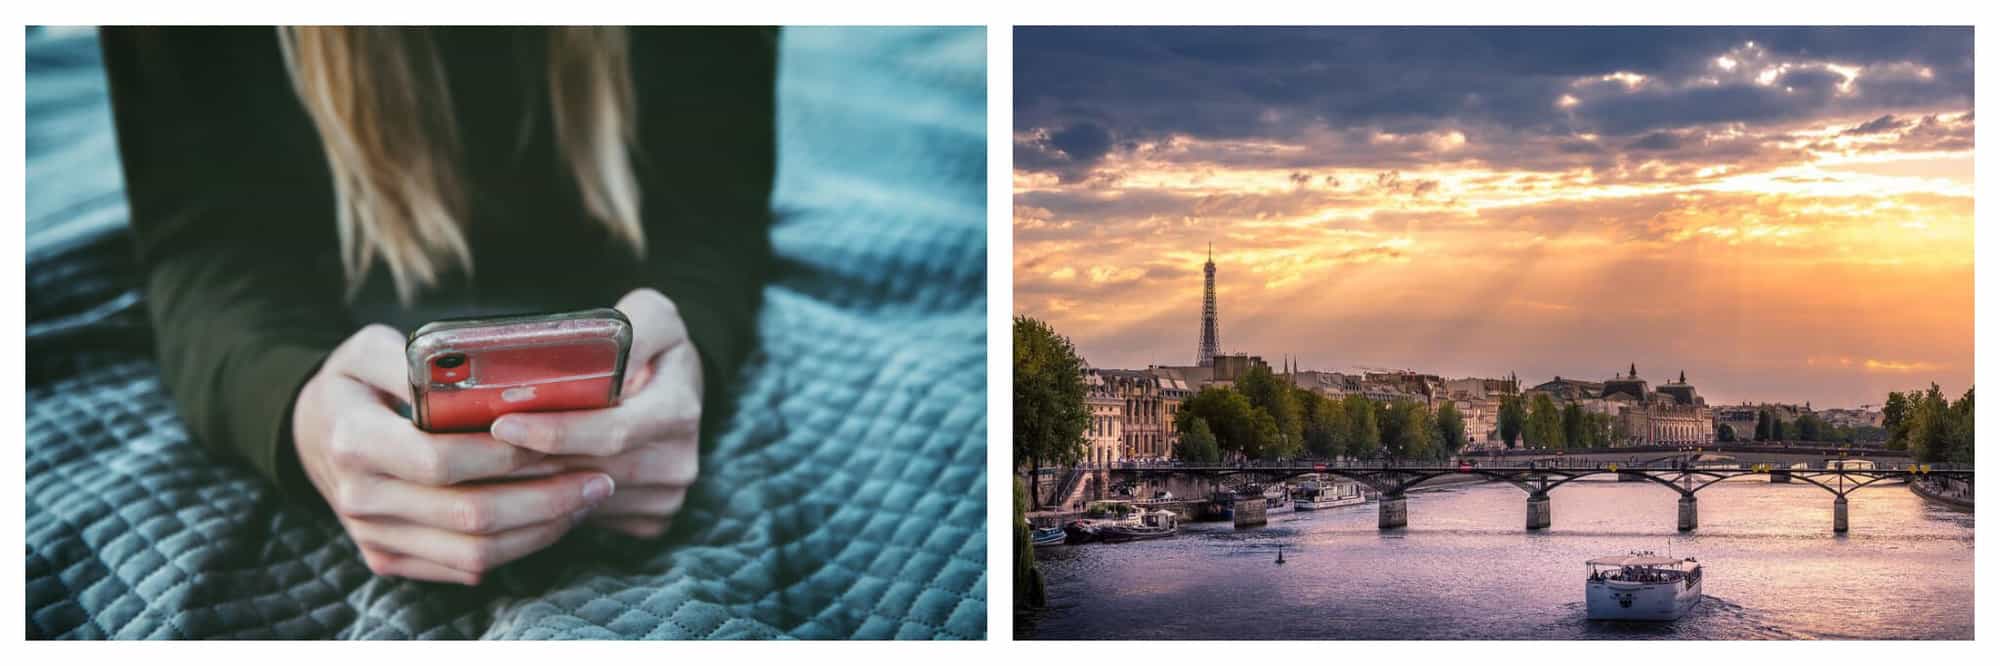 Left: a close up picture of a girl on her phone in bed. The girl is using a red iPhone while lying on her bed. Right: a picture of a sunset in Paris, taken from a bridge crossing the seine where the Eiffel tower can be seen. 